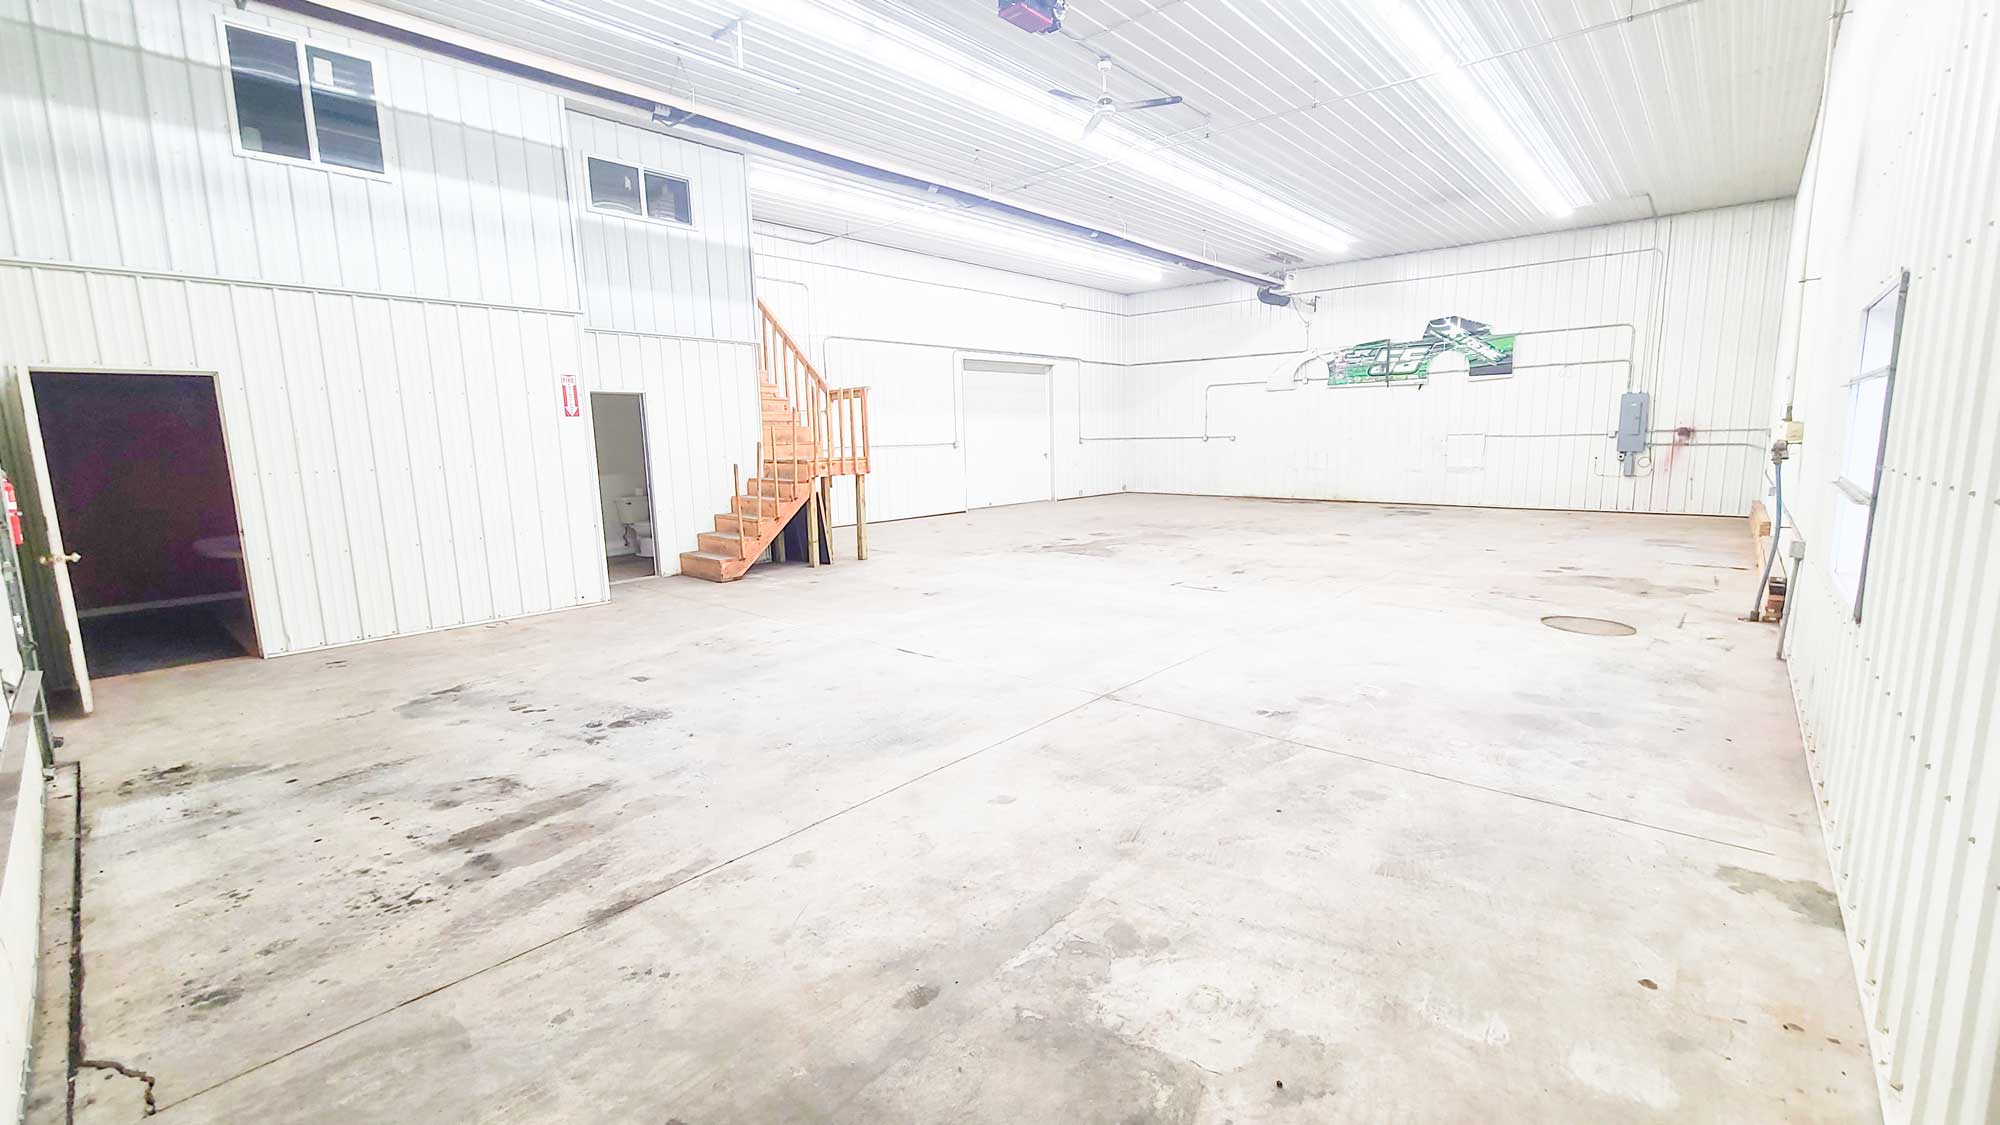 Small warehouse space for rent near me with floor drain.